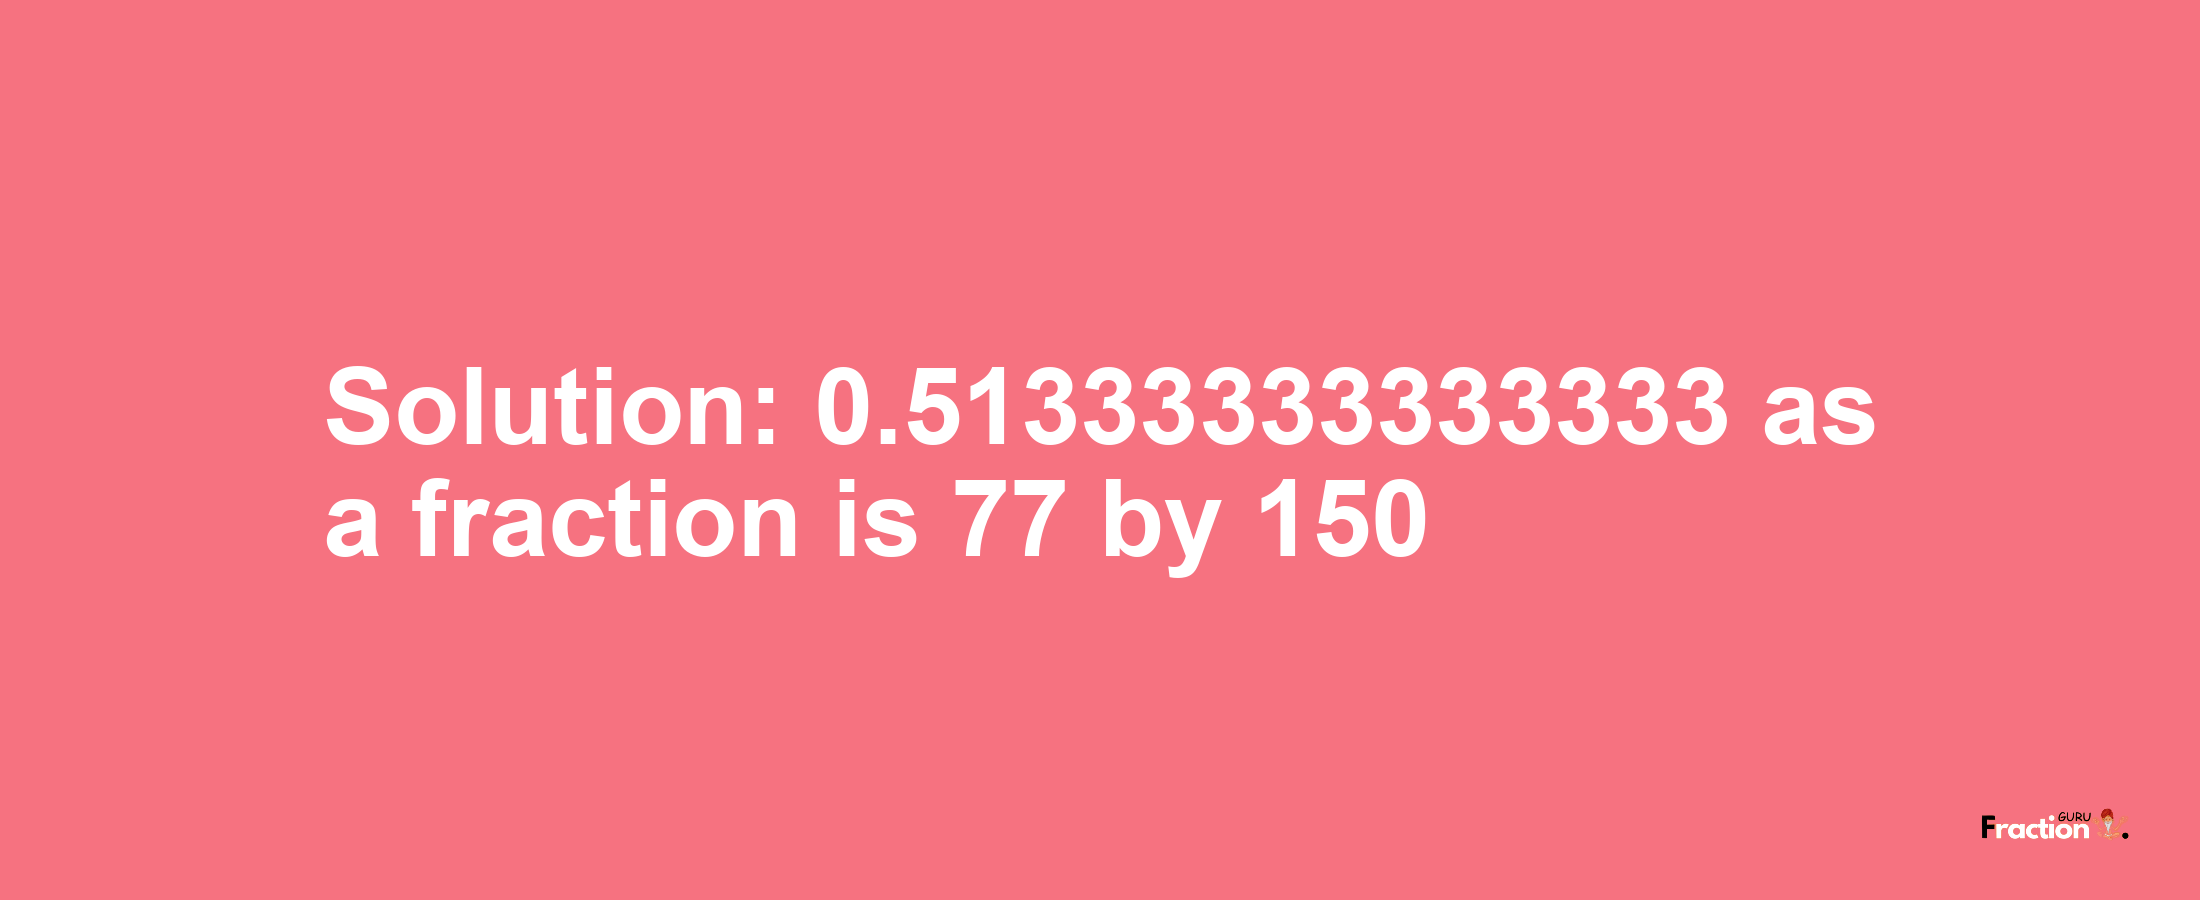 Solution:0.51333333333333 as a fraction is 77/150